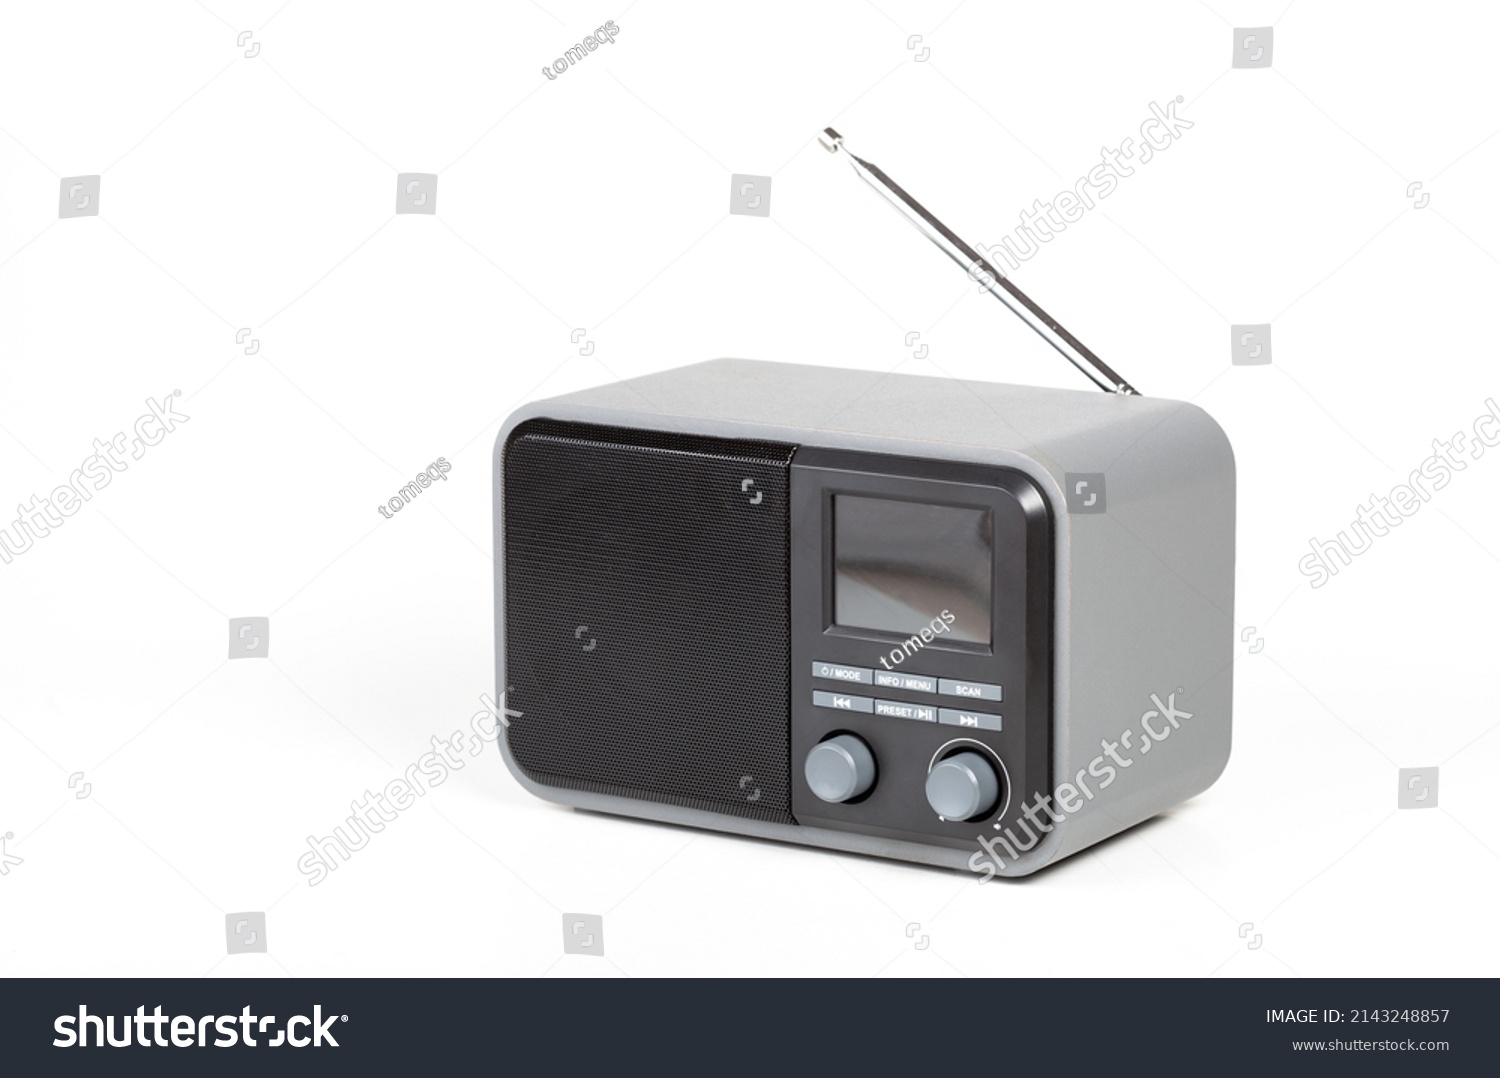 Simple small generic digital and analog home radio receiver device, object isolated on white, cut out. AM FM bands modern radio product, DAB, DAB+, internet radio receiver technology broadcast concept #2143248857